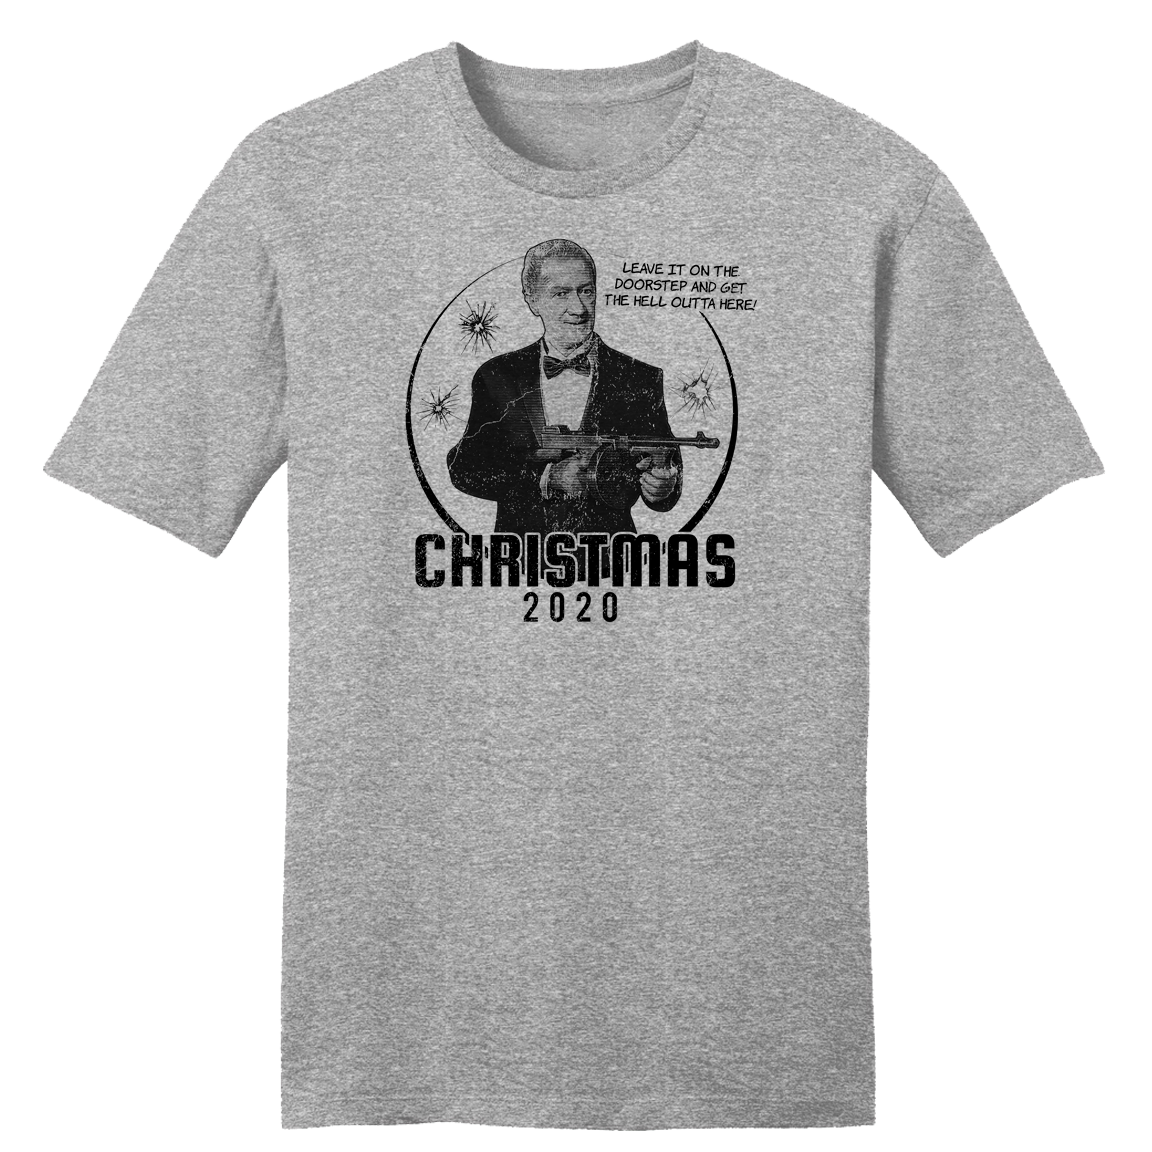 Get Outta Here Christmas 2020 T-shirt